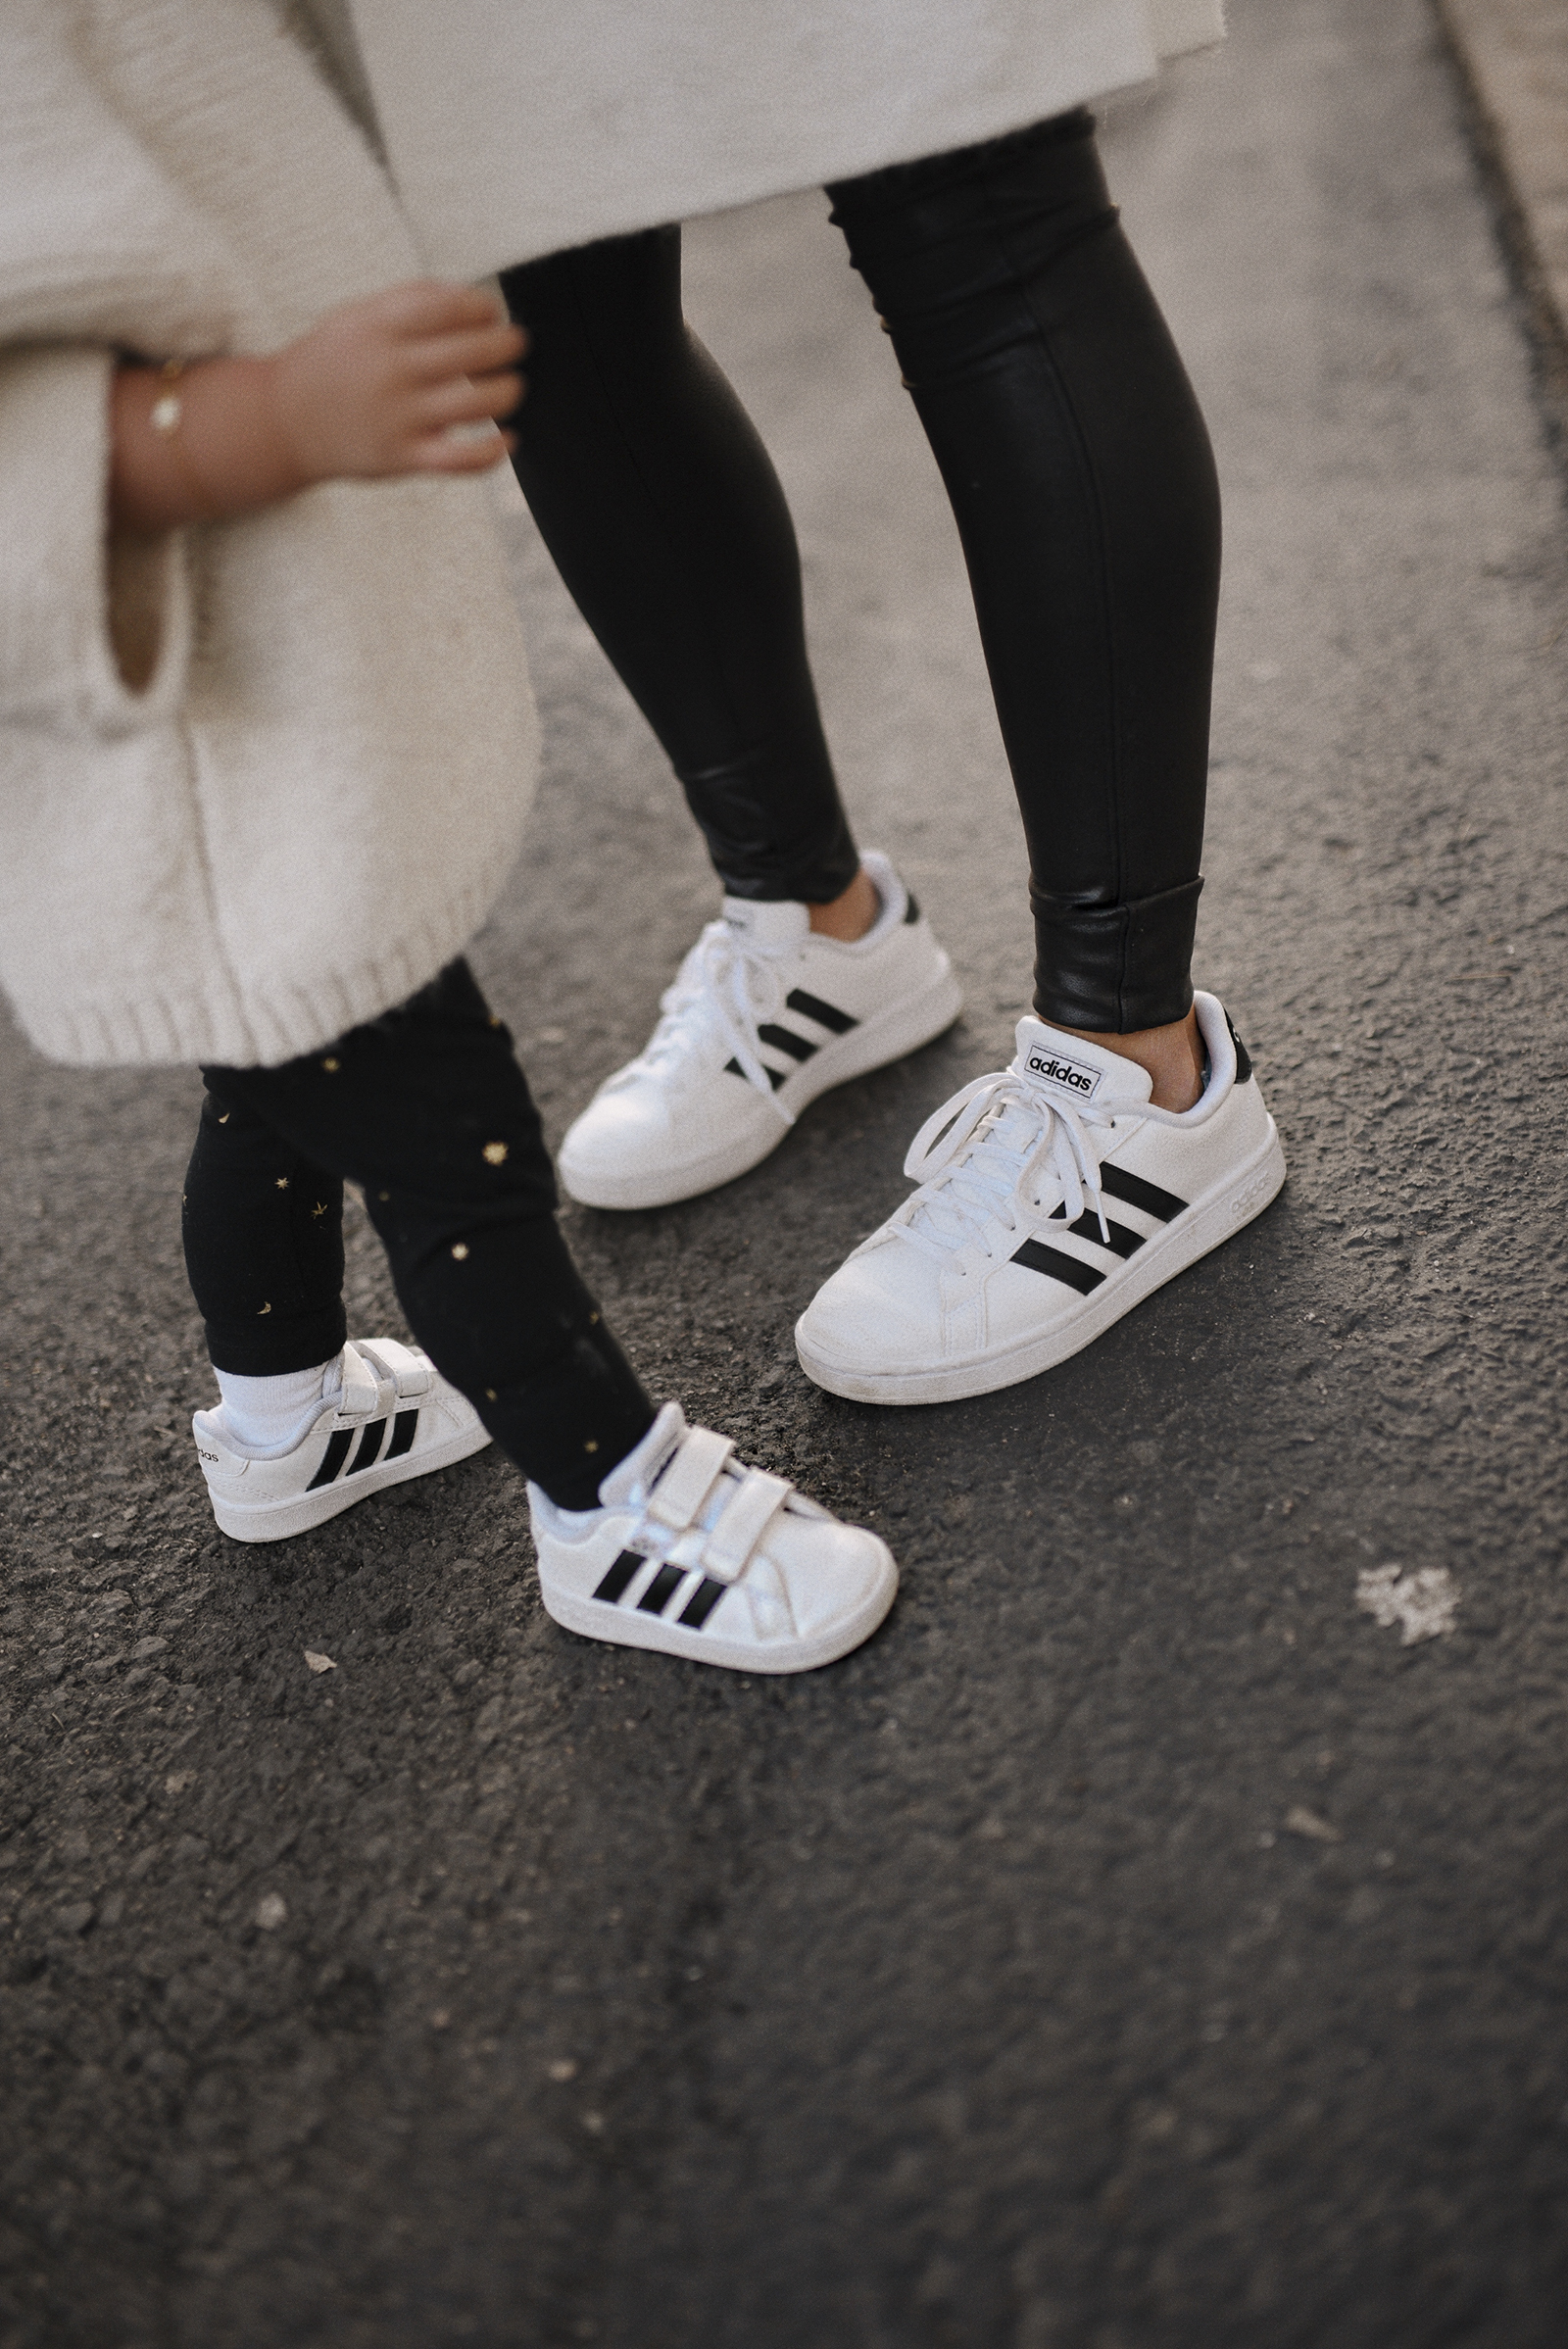 MOTHER DAUGHTER MATCHING OUTFITS | CHIC 